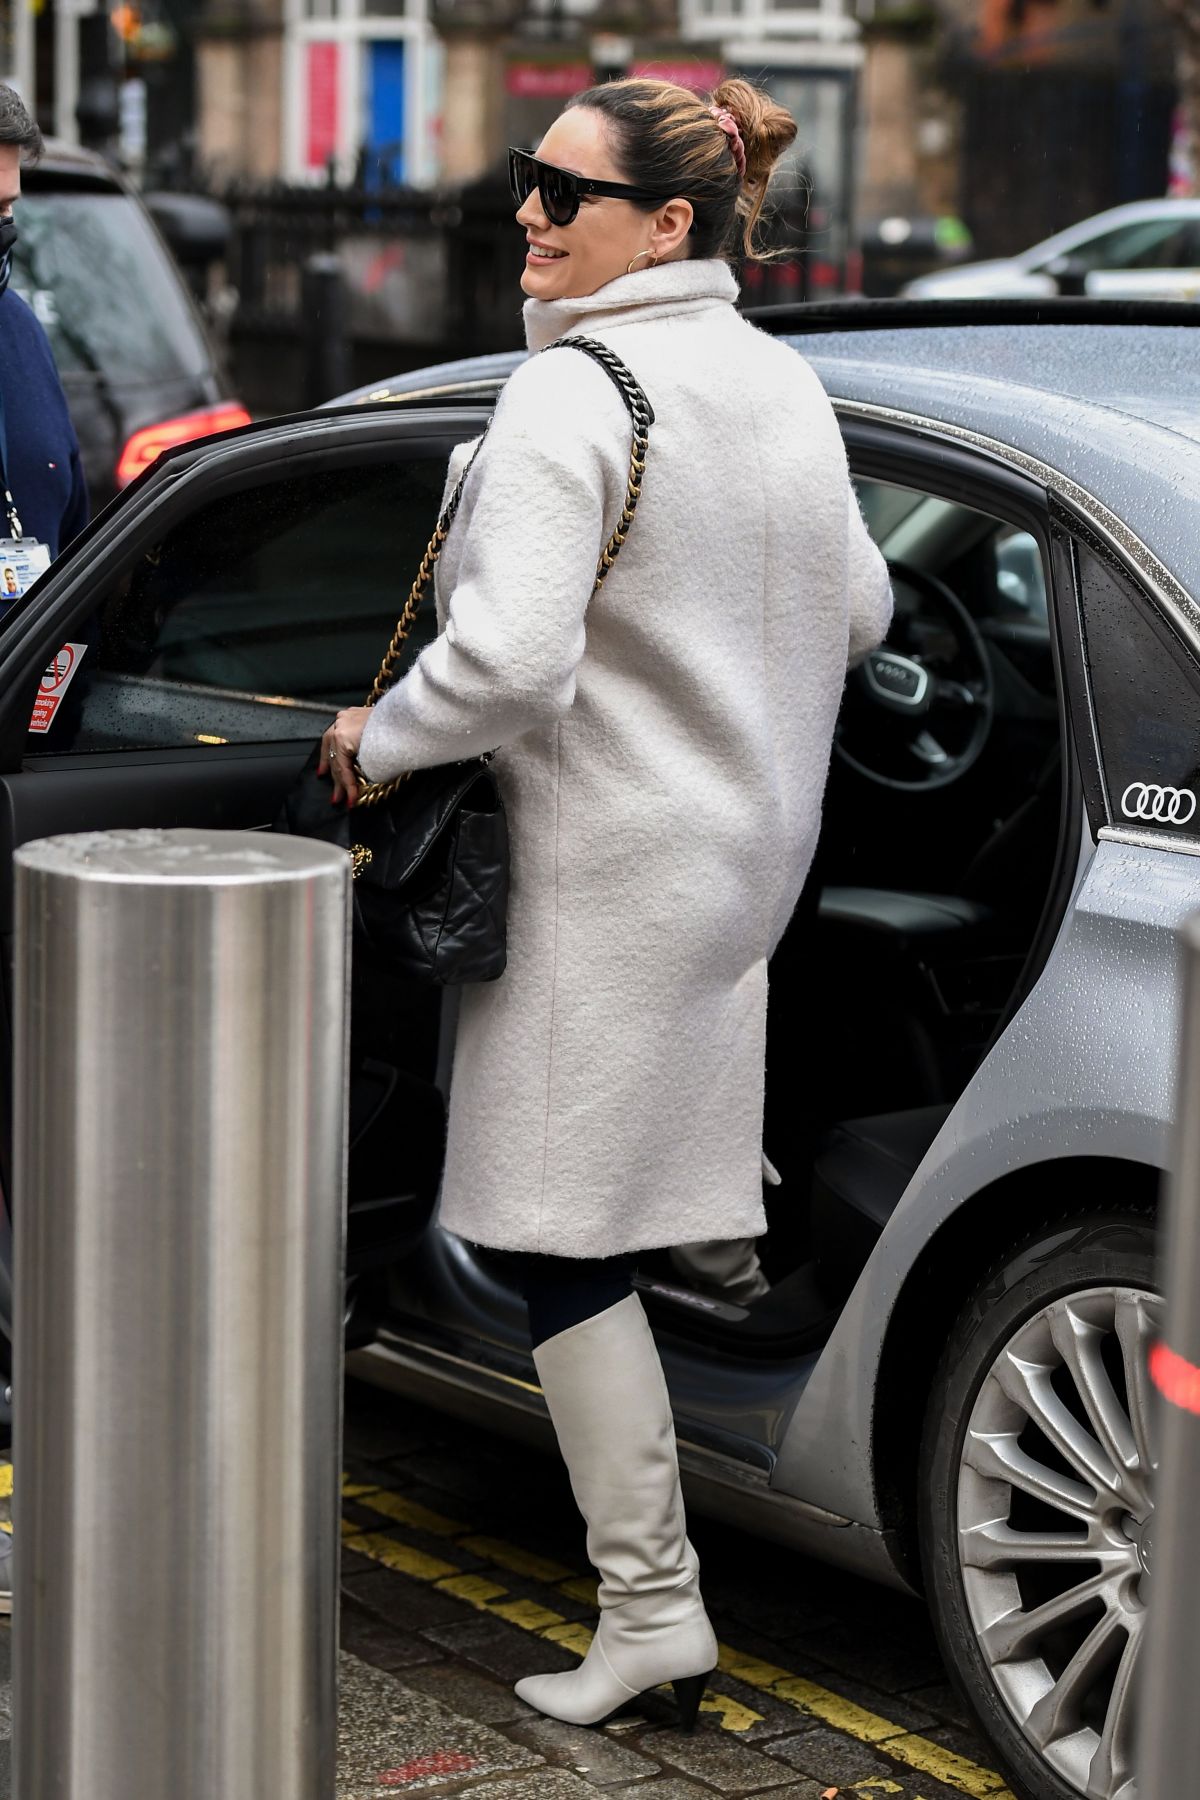 179310298_kelly-brook-in-a-white-coat-and-boots-at-global-radio-in-london-12-23-2020-8.jpg